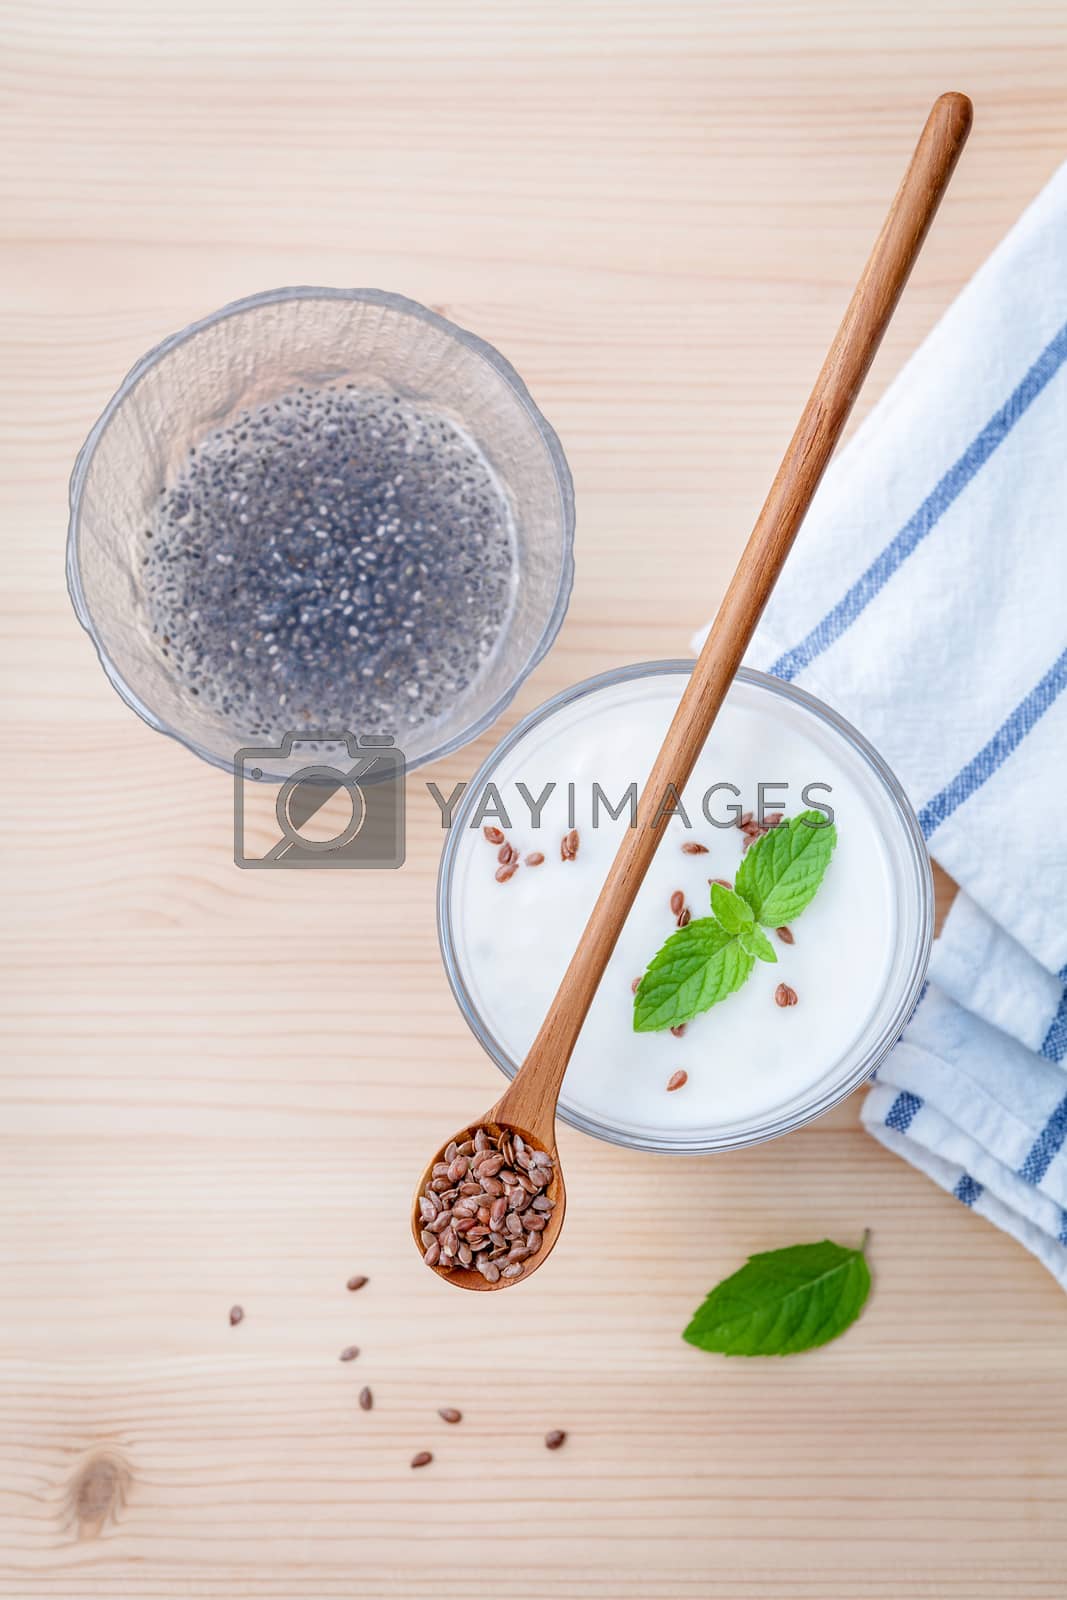 Royalty free image of Nutritious flax seeds with glass of greek yogurt and wooden spoo by kerdkanno